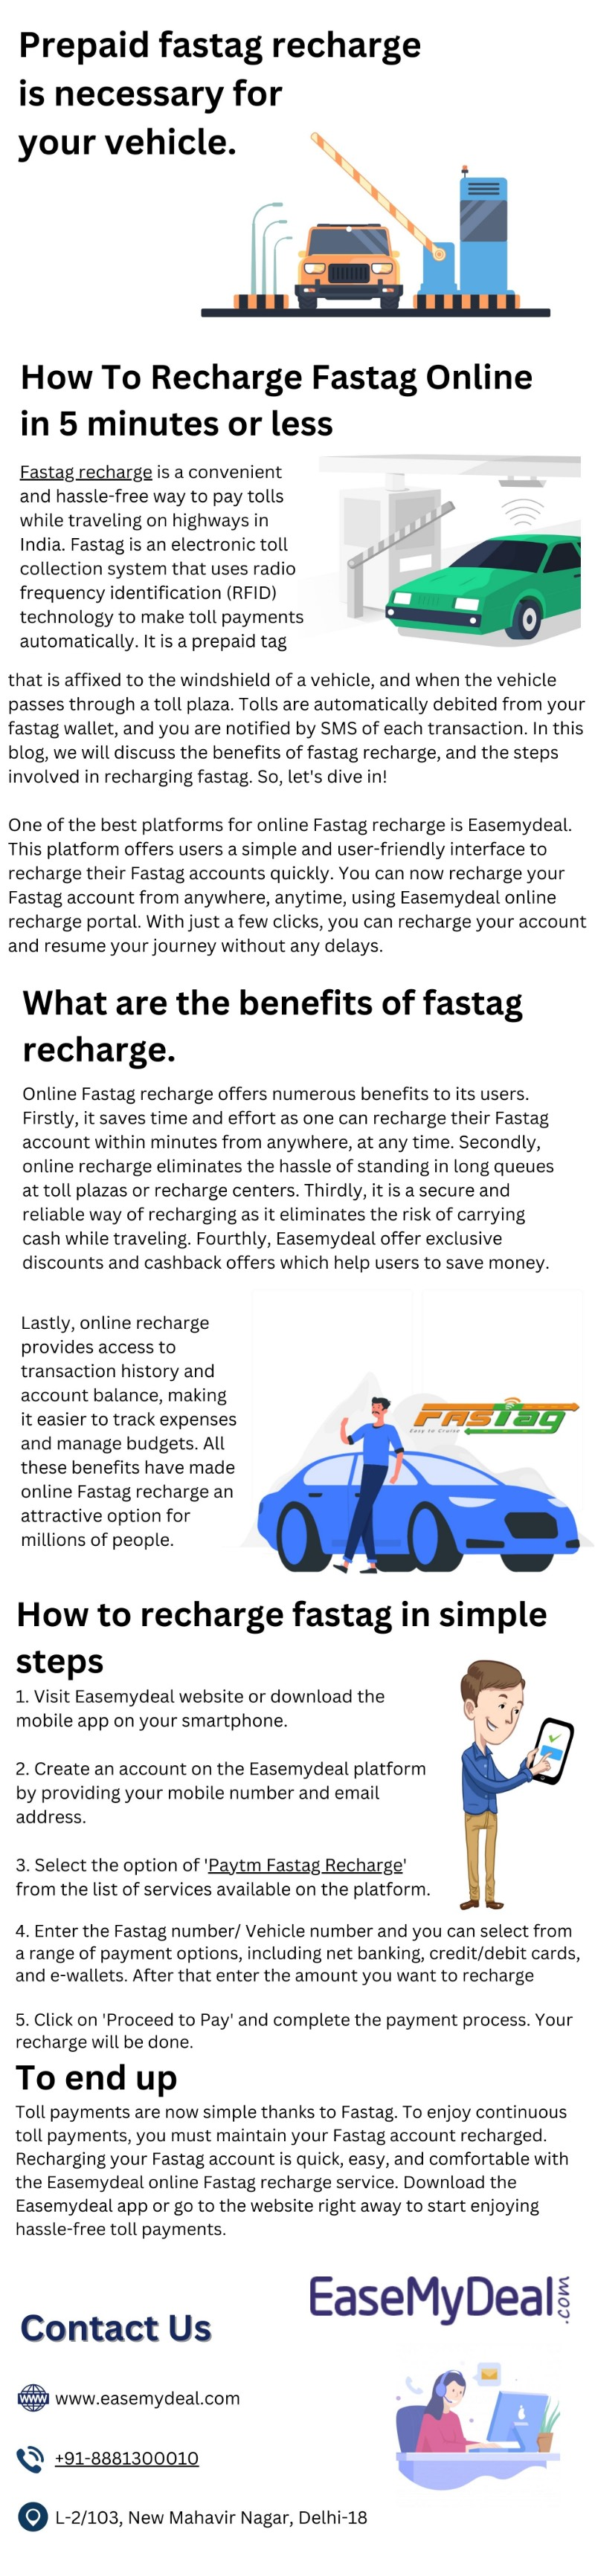 Prepaid fastag recharge is necessary for your vehicle